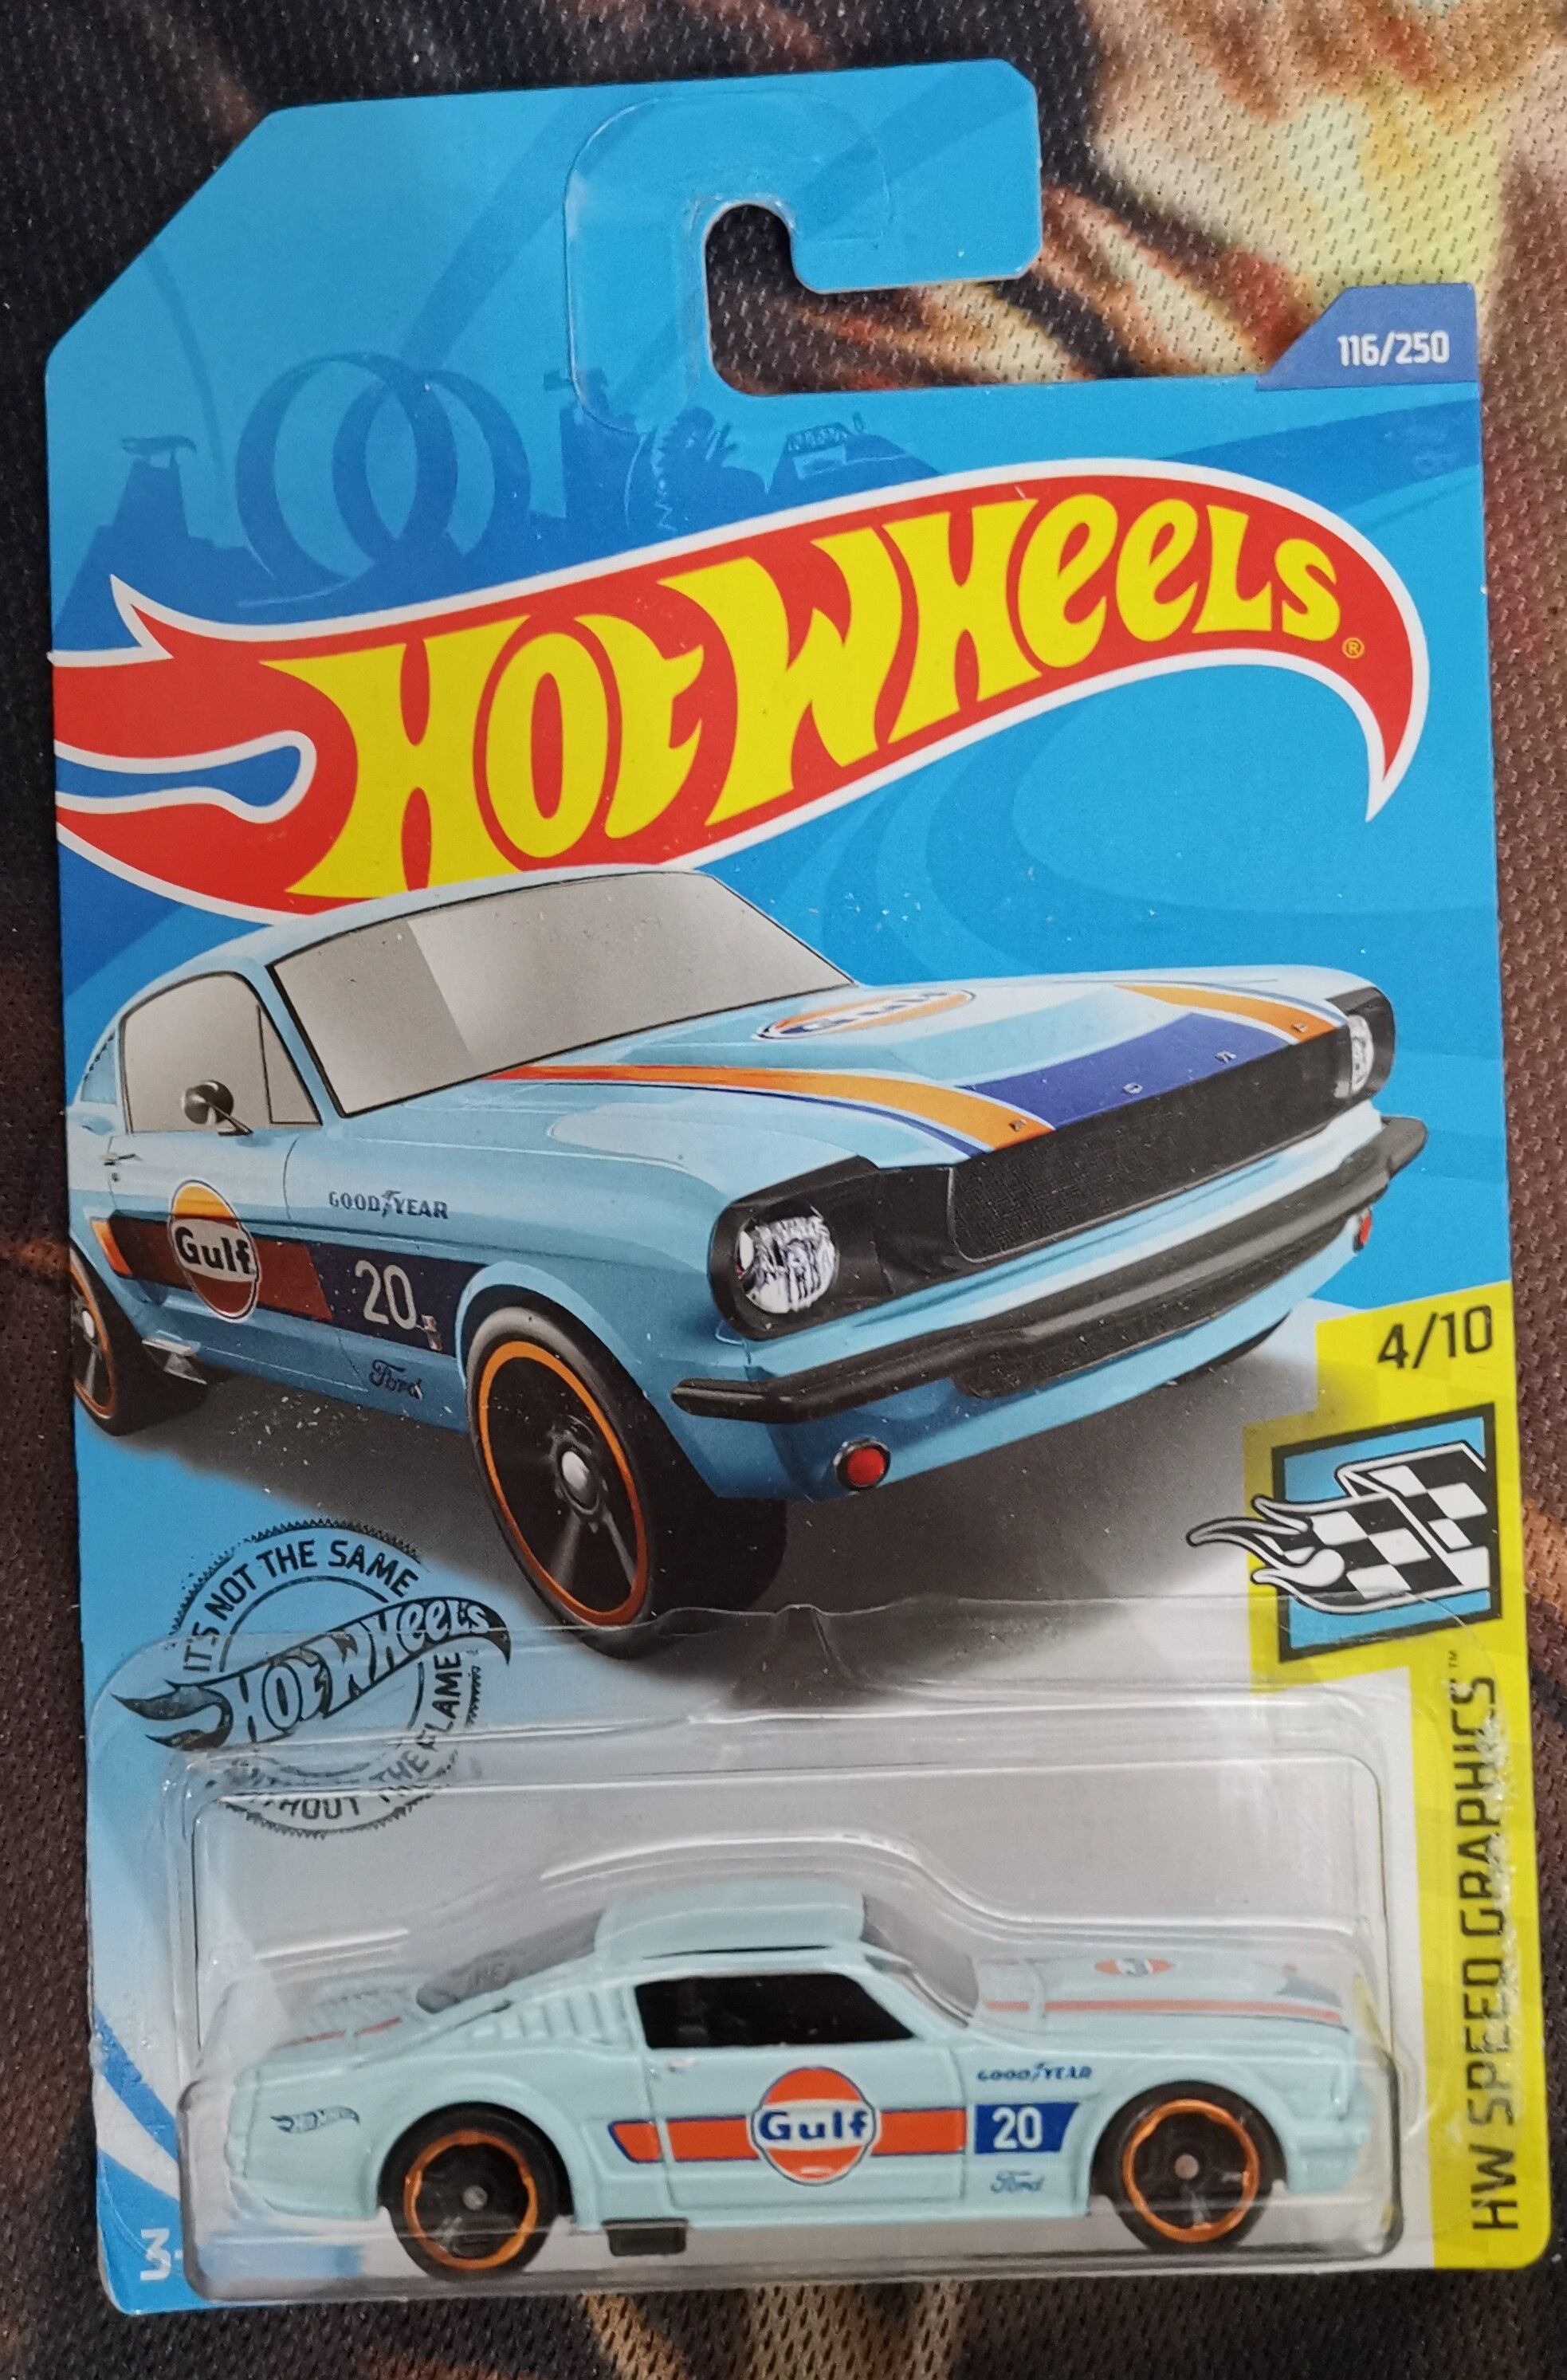 2020 Hot Wheels #116 HW Speed Graphics-GULF 4/10 '65 MUSTANG 2+2 FASTBACK Blue 